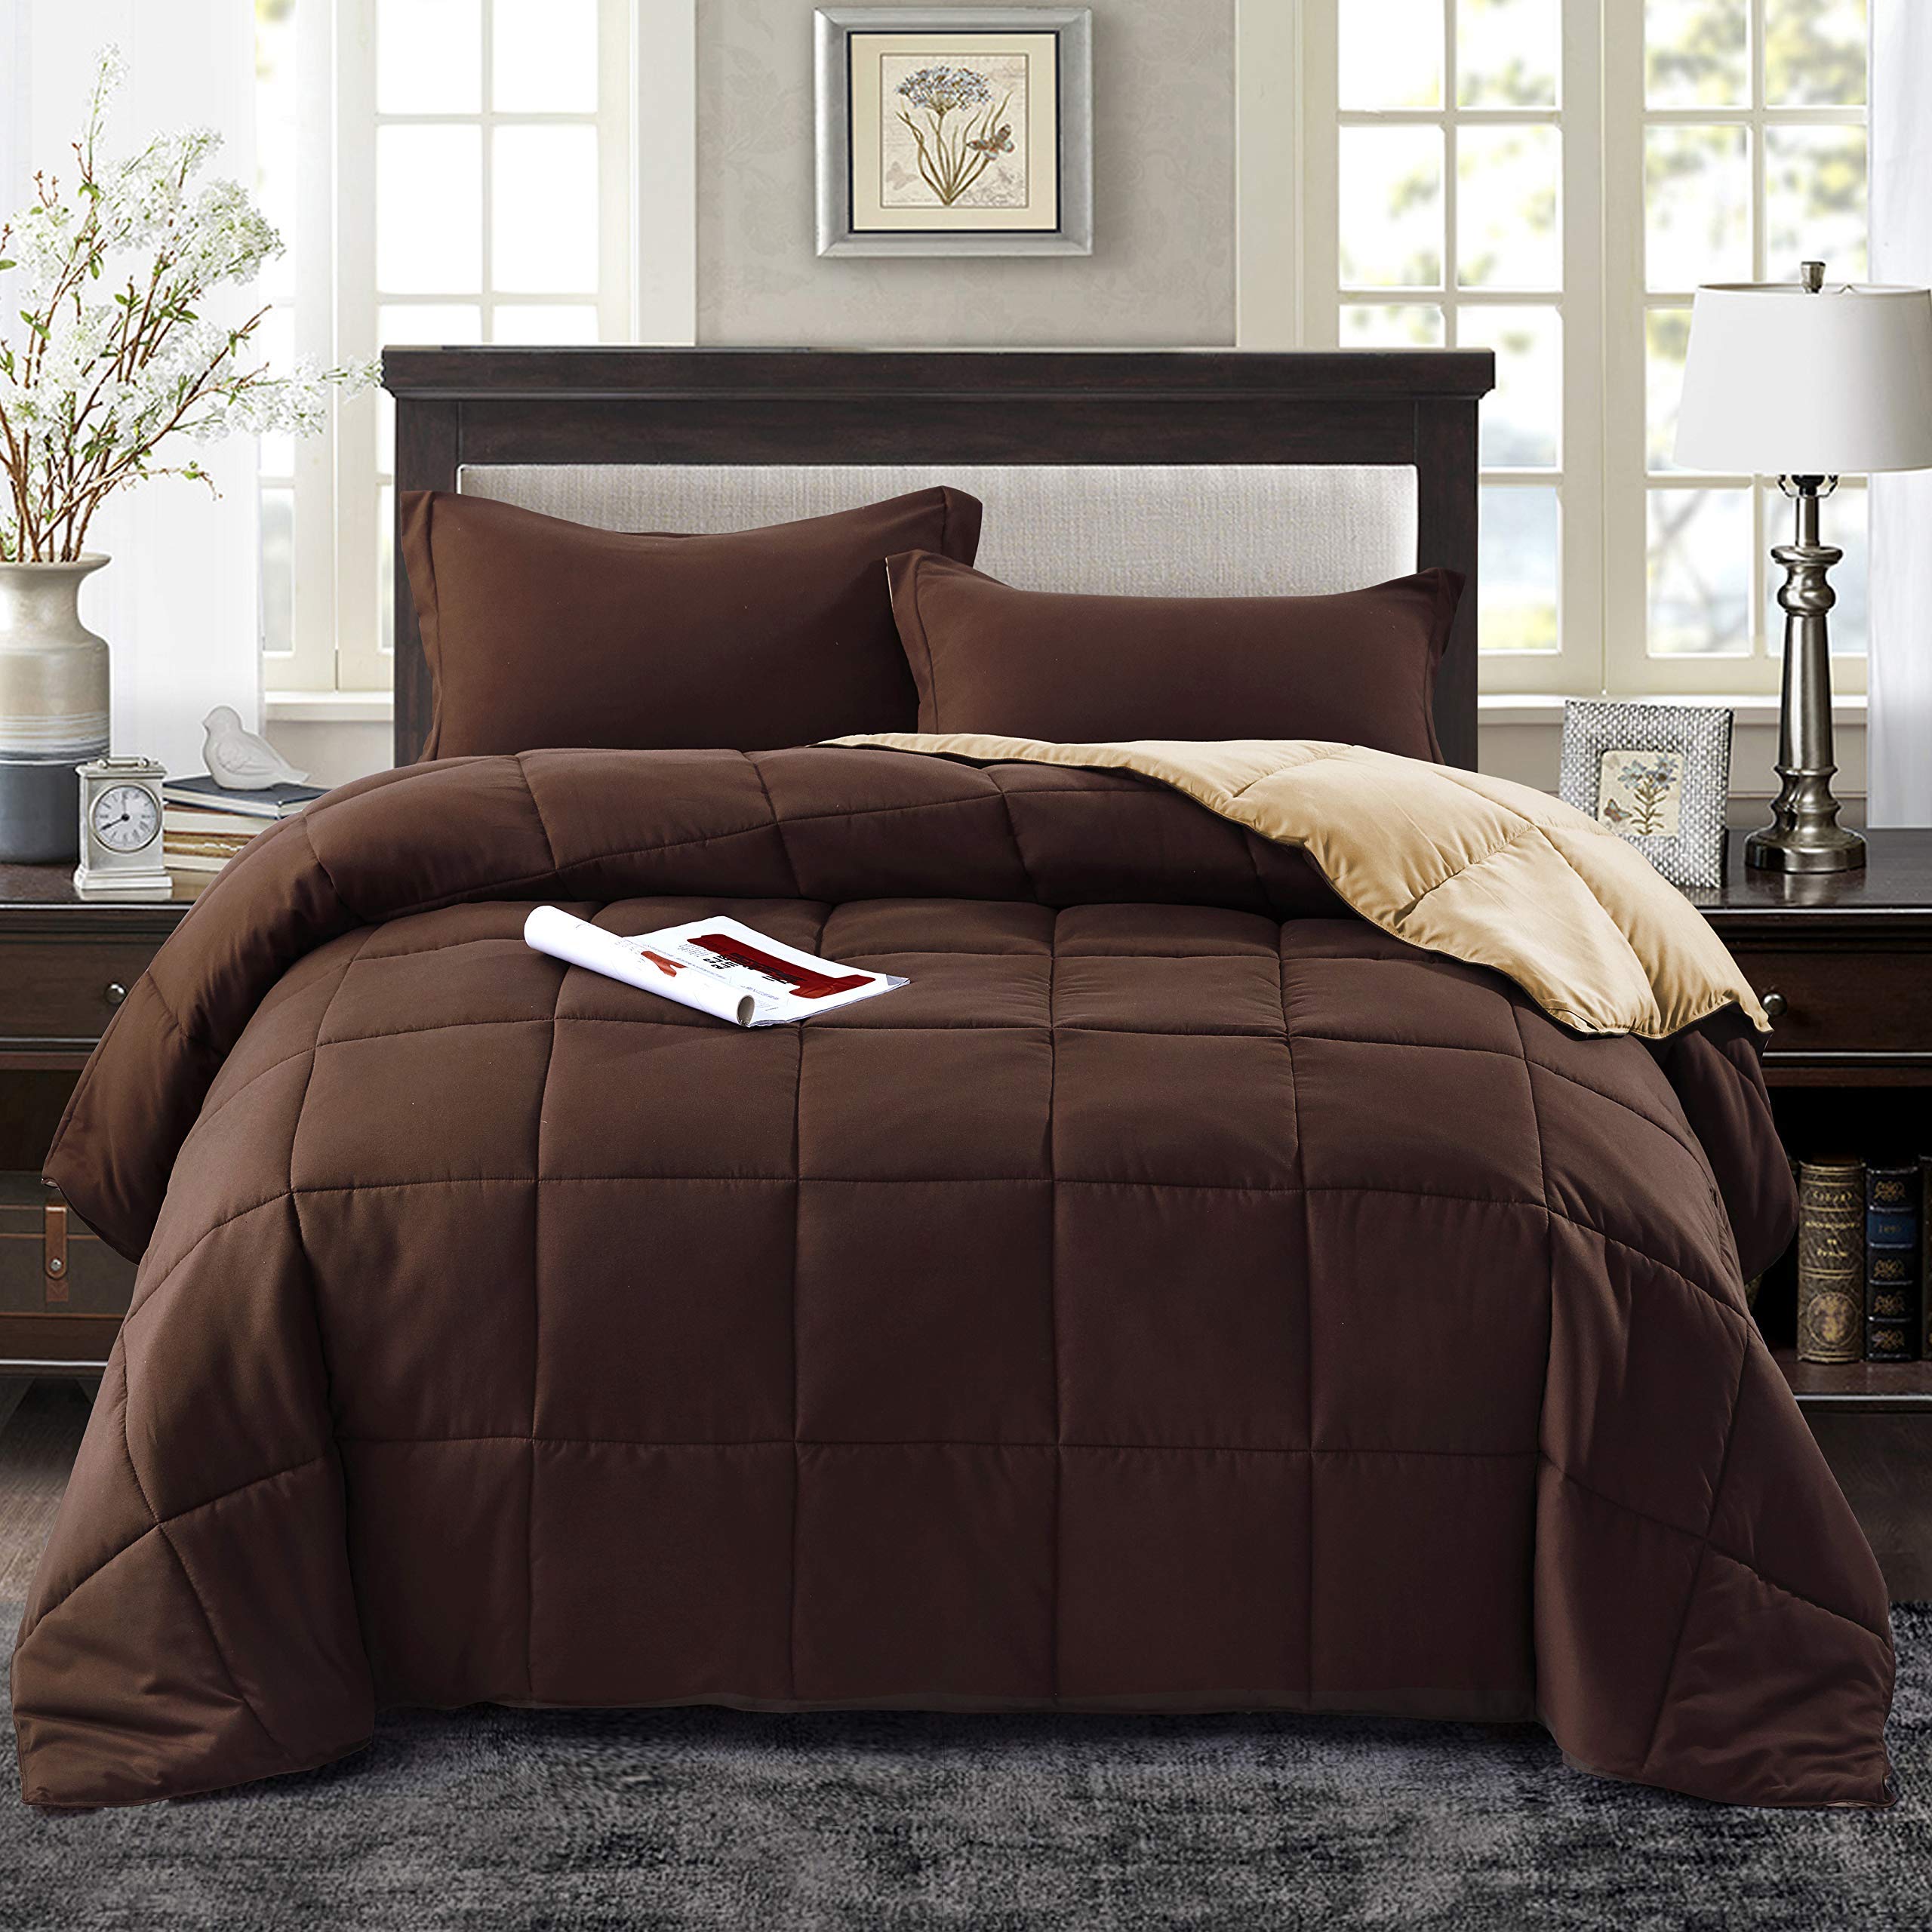 Book Cover HIG 3pc Down Alternative Comforter Set - All Season Reversible Comforter with Sham - Quilted Duvet Insert with Corner Tabs - Box Stitched - Super Soft, Fluffy (Twin/Twin XL, Chocolate)